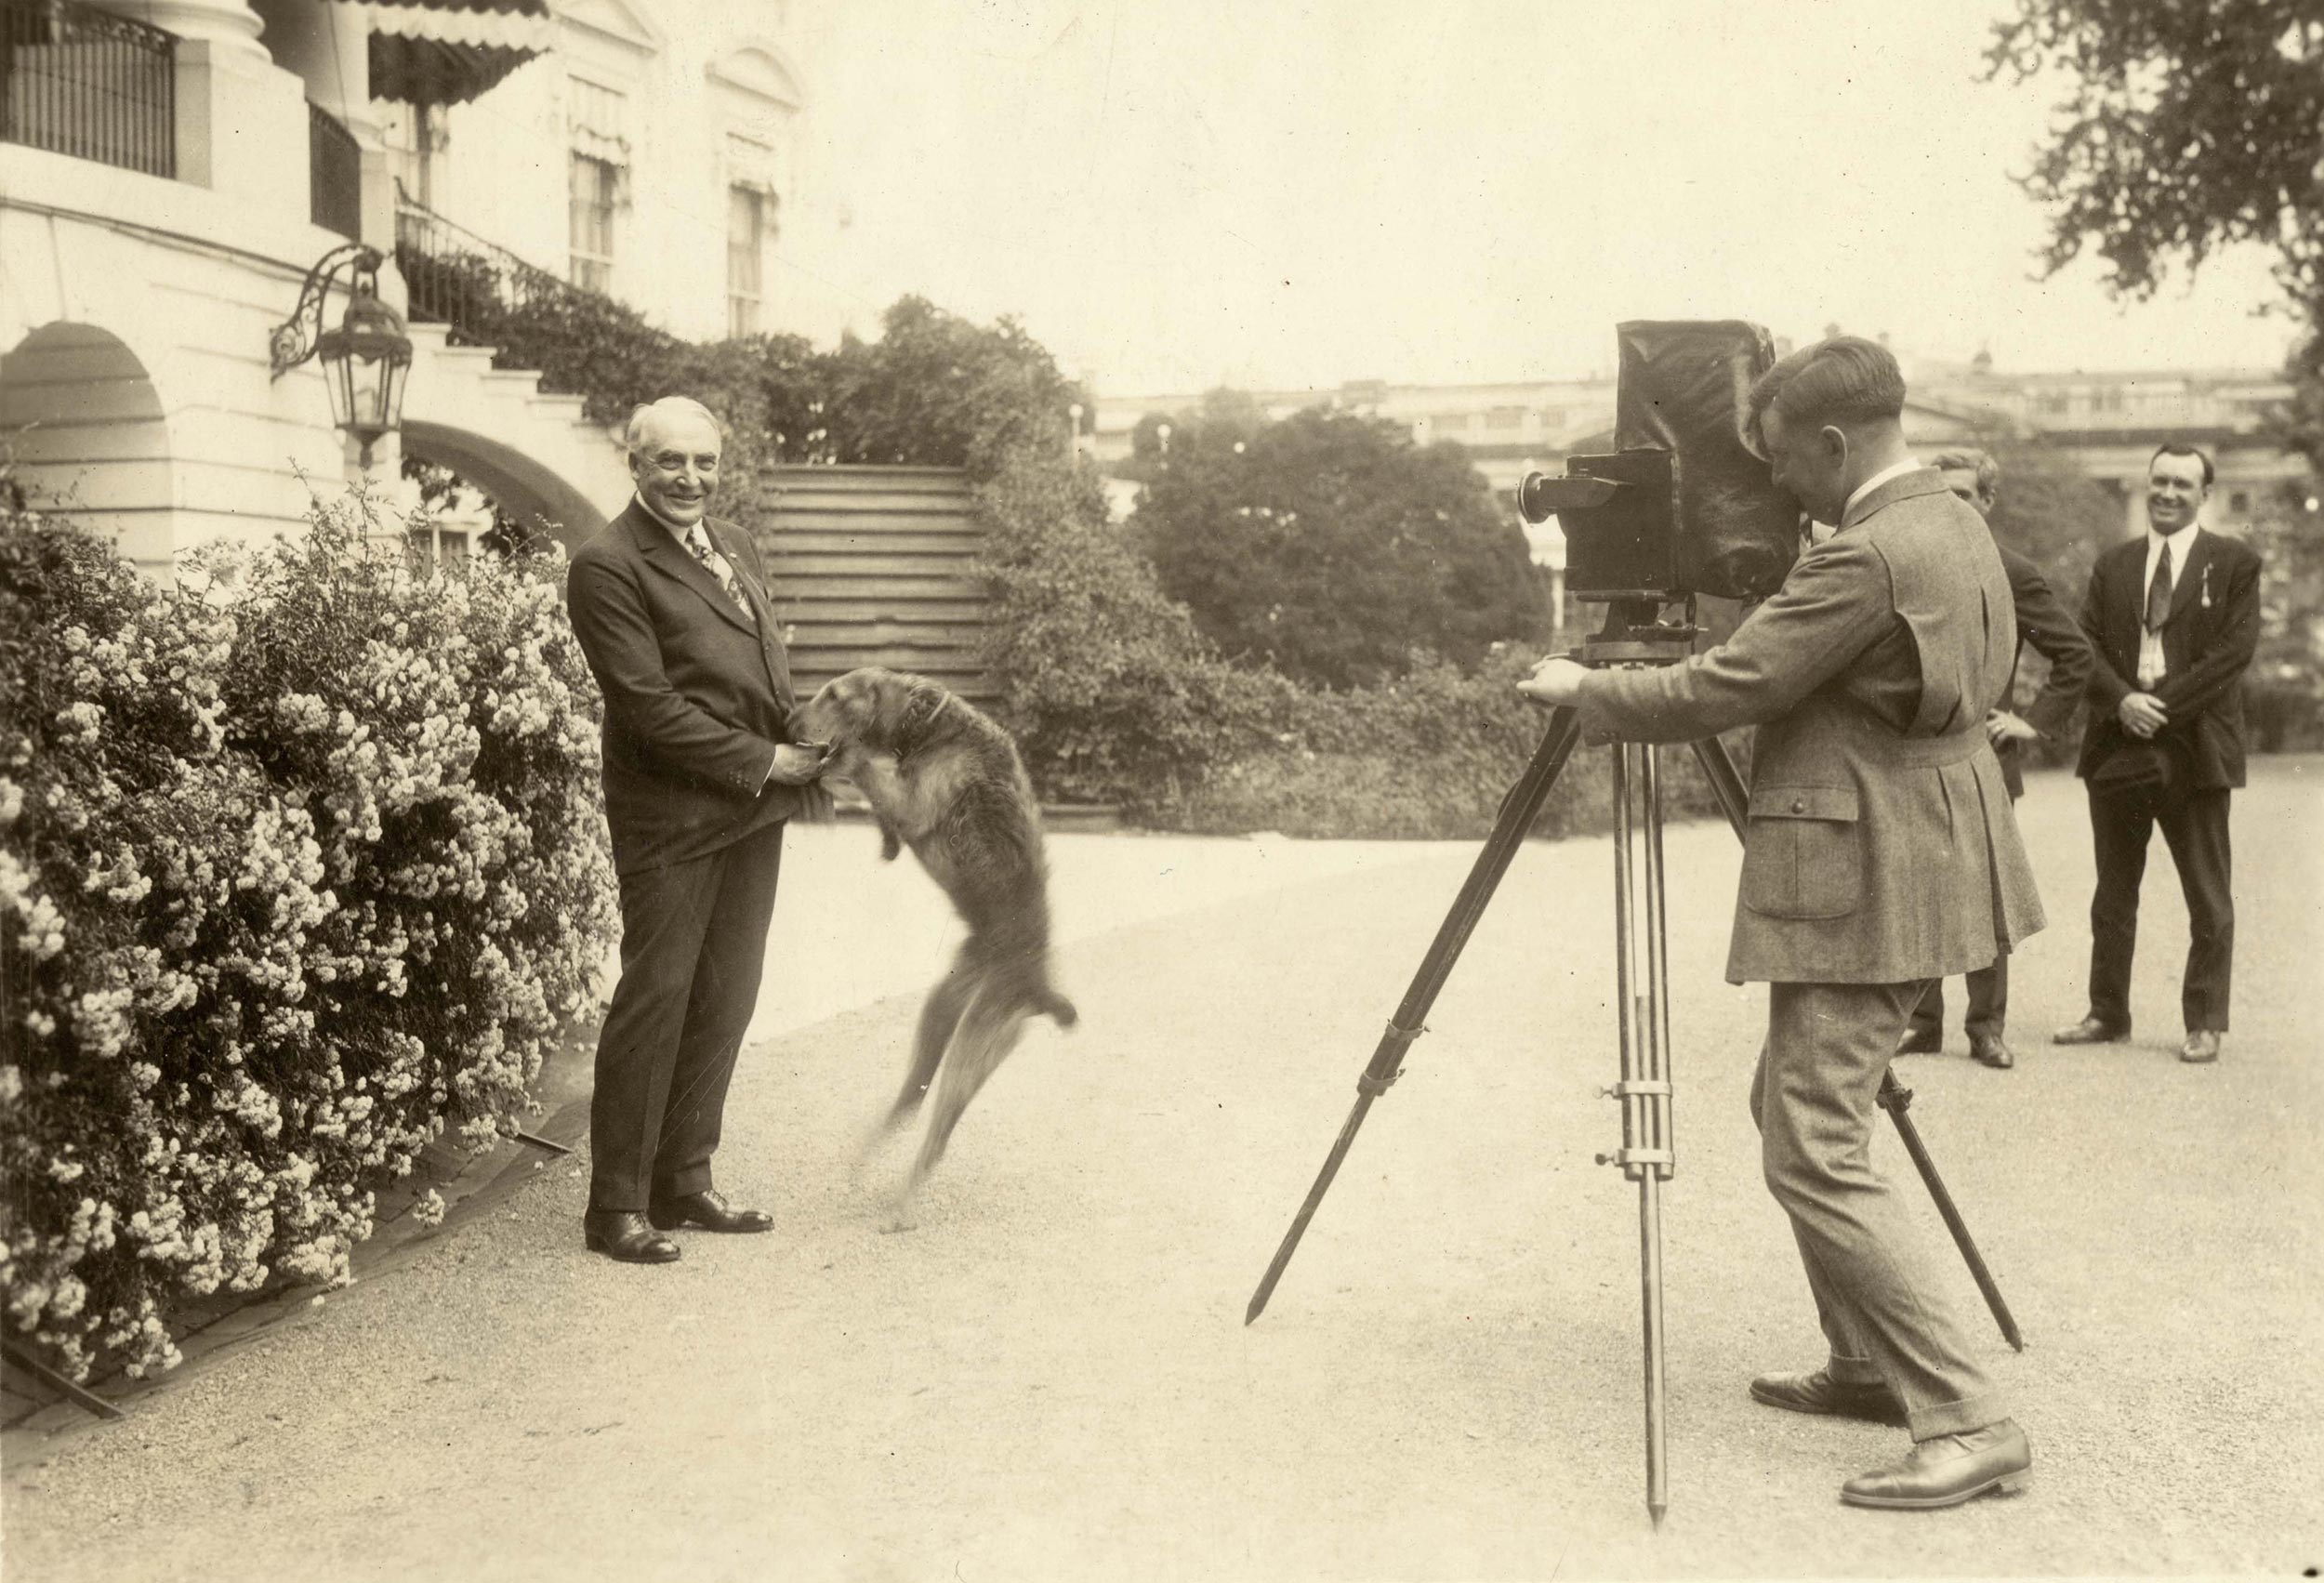 President Warren G. Harding plays with his dog Laddie in front of the White House, June 13, 1922 - National Photo Company/Library of Congress, Prints & Photographs Div